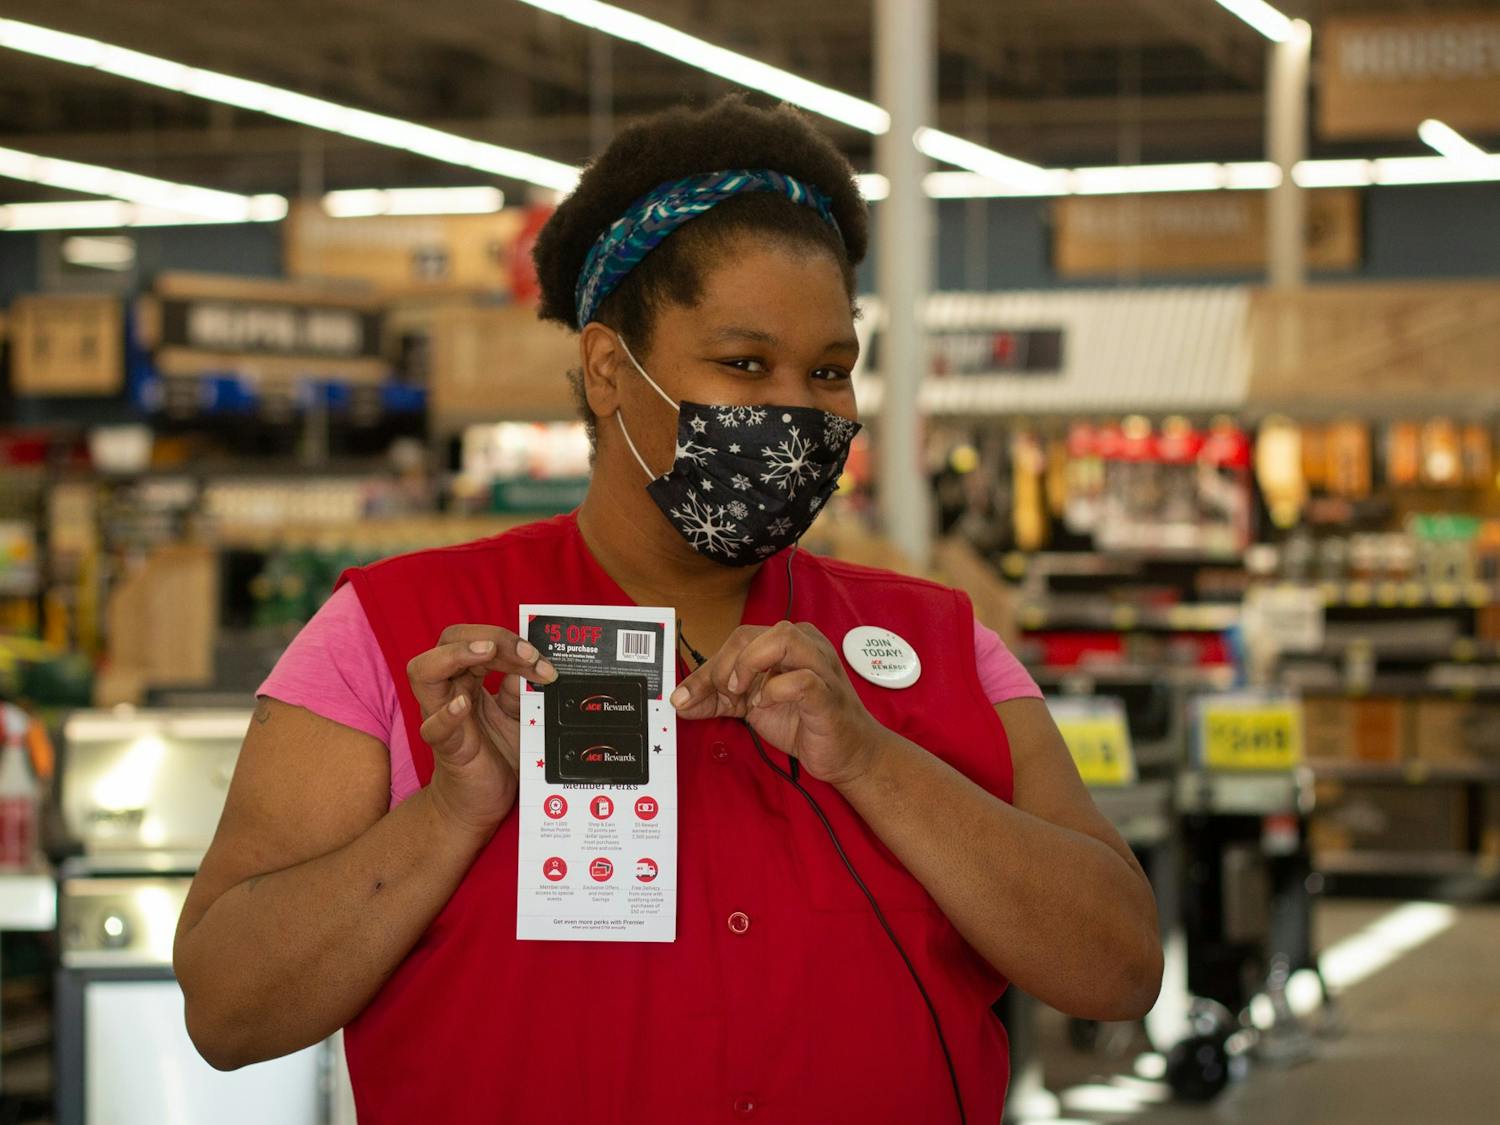 Krystal L., 37, is the head cashier of the newly opened Westlake Ace Hardware in Chapel Hill, NC on Wednesday, April 7th, 2021.